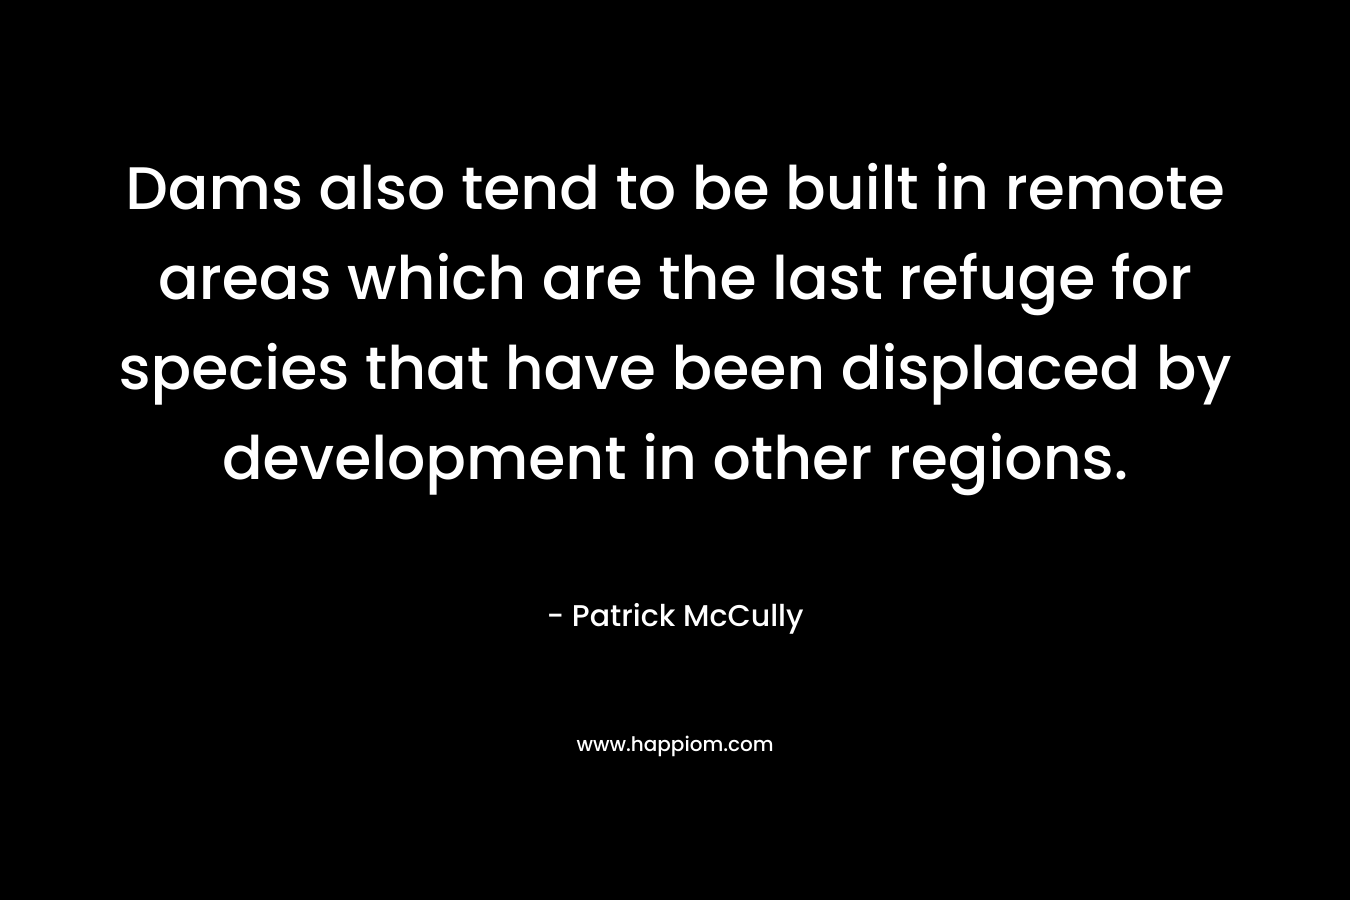 Dams also tend to be built in remote areas which are the last refuge for species that have been displaced by development in other regions. – Patrick McCully